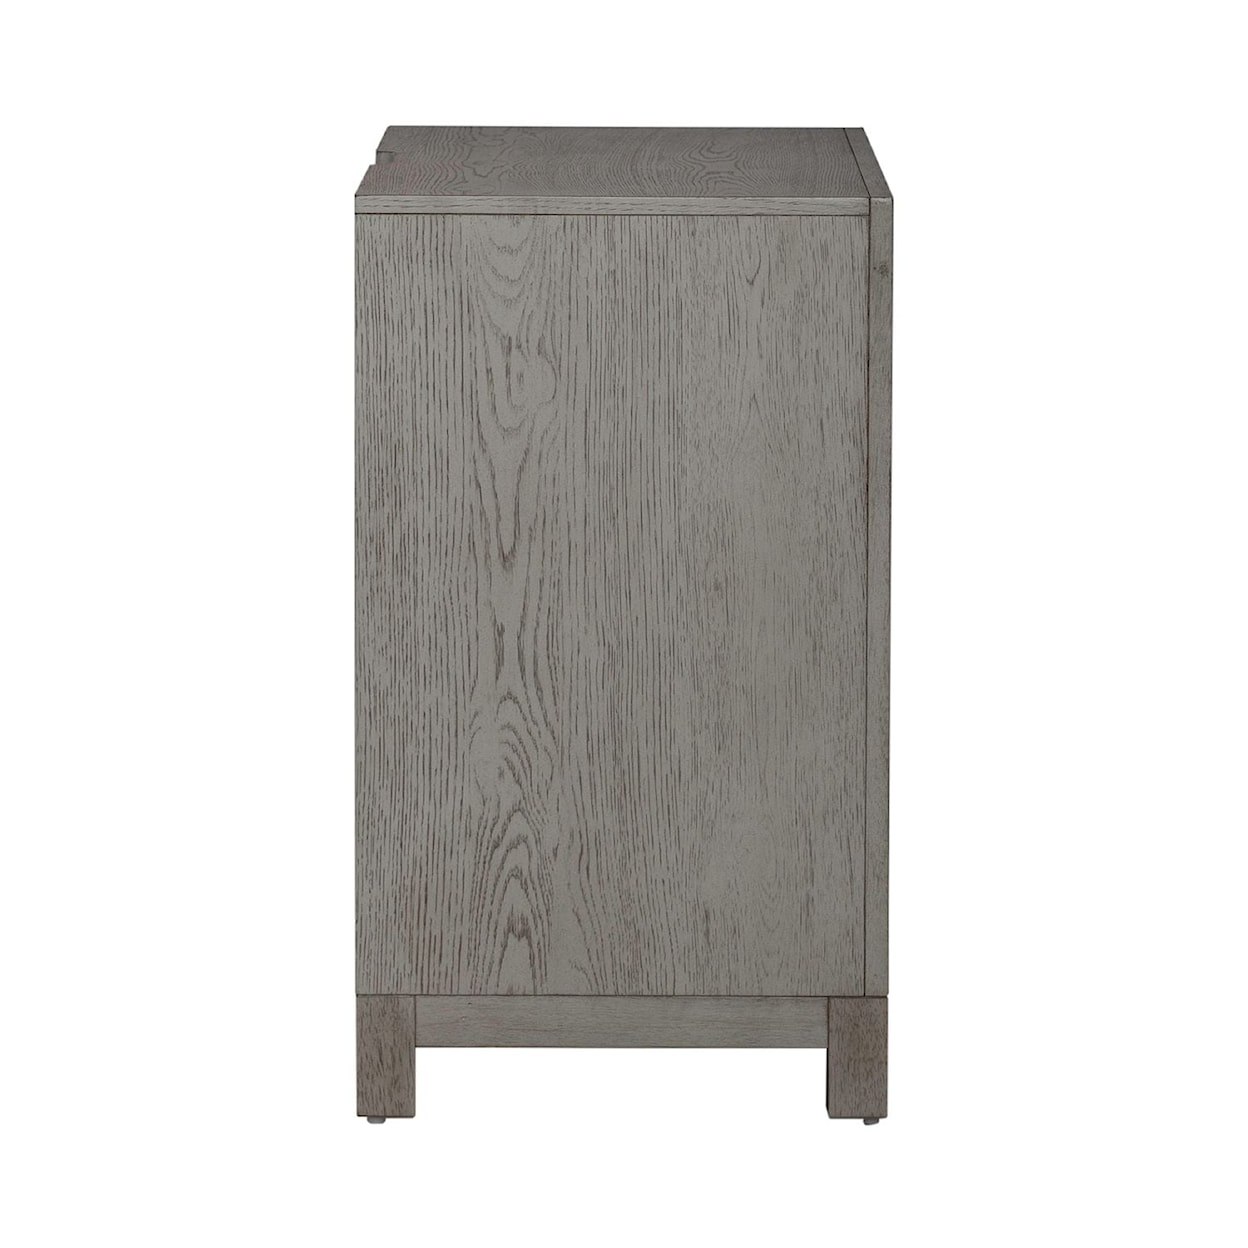 Libby Palmetto Heights 2-Drawer Nightstand